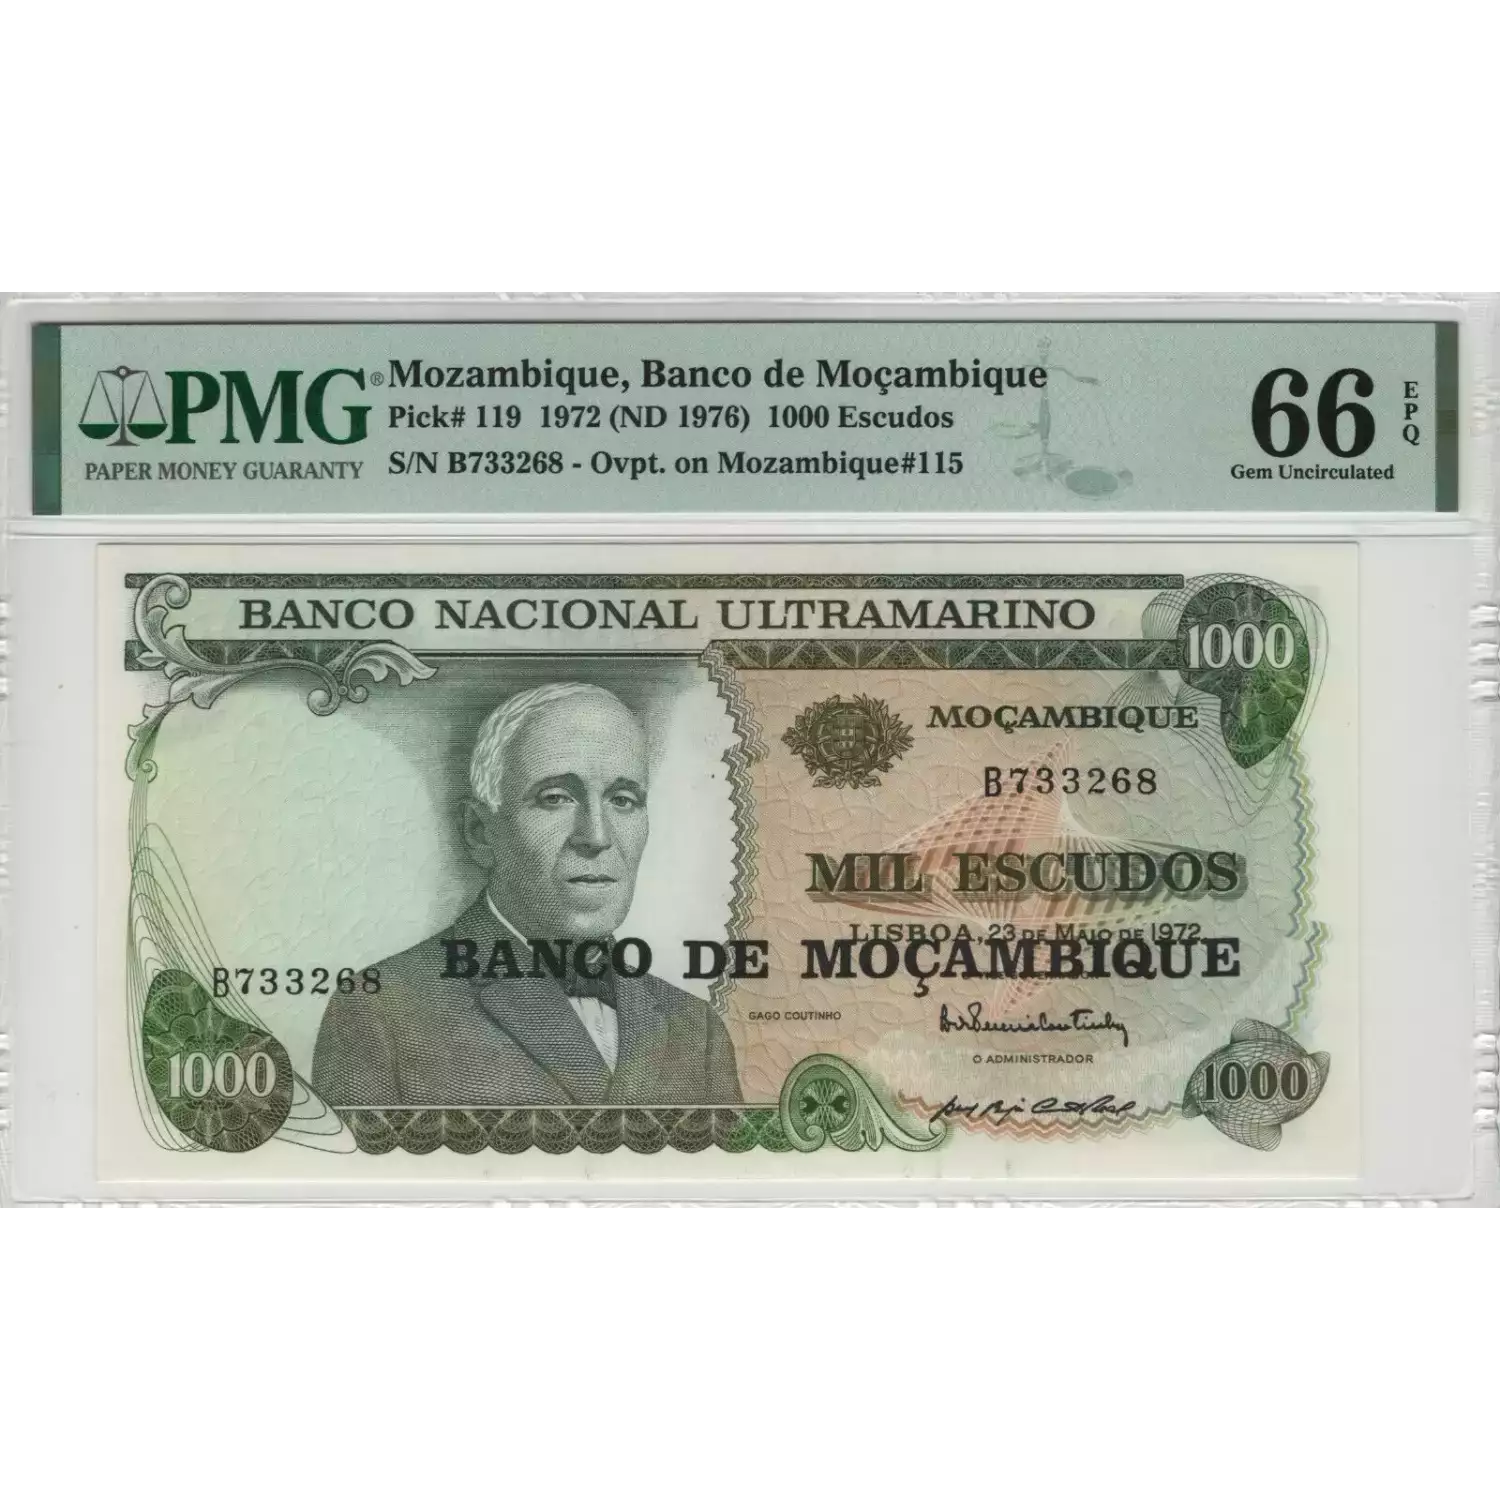 1000 Escudos ND (1976 - old date 23.5.1972), 1976 ND Provisional Issue  Mozambique 119